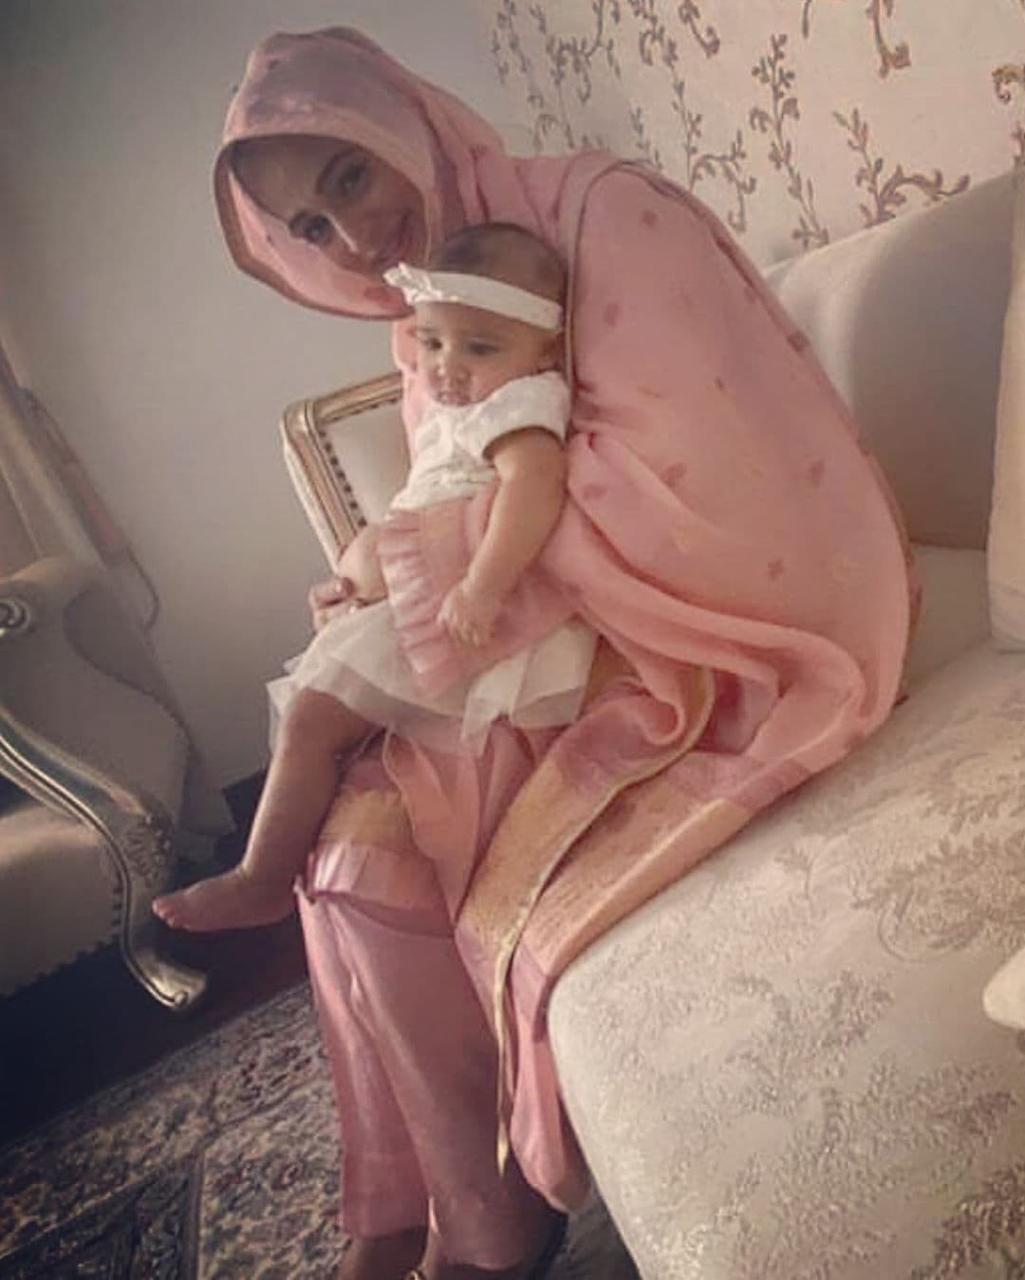 Noor Bukhari Celebrated Eid with Her Newly Born Daughter